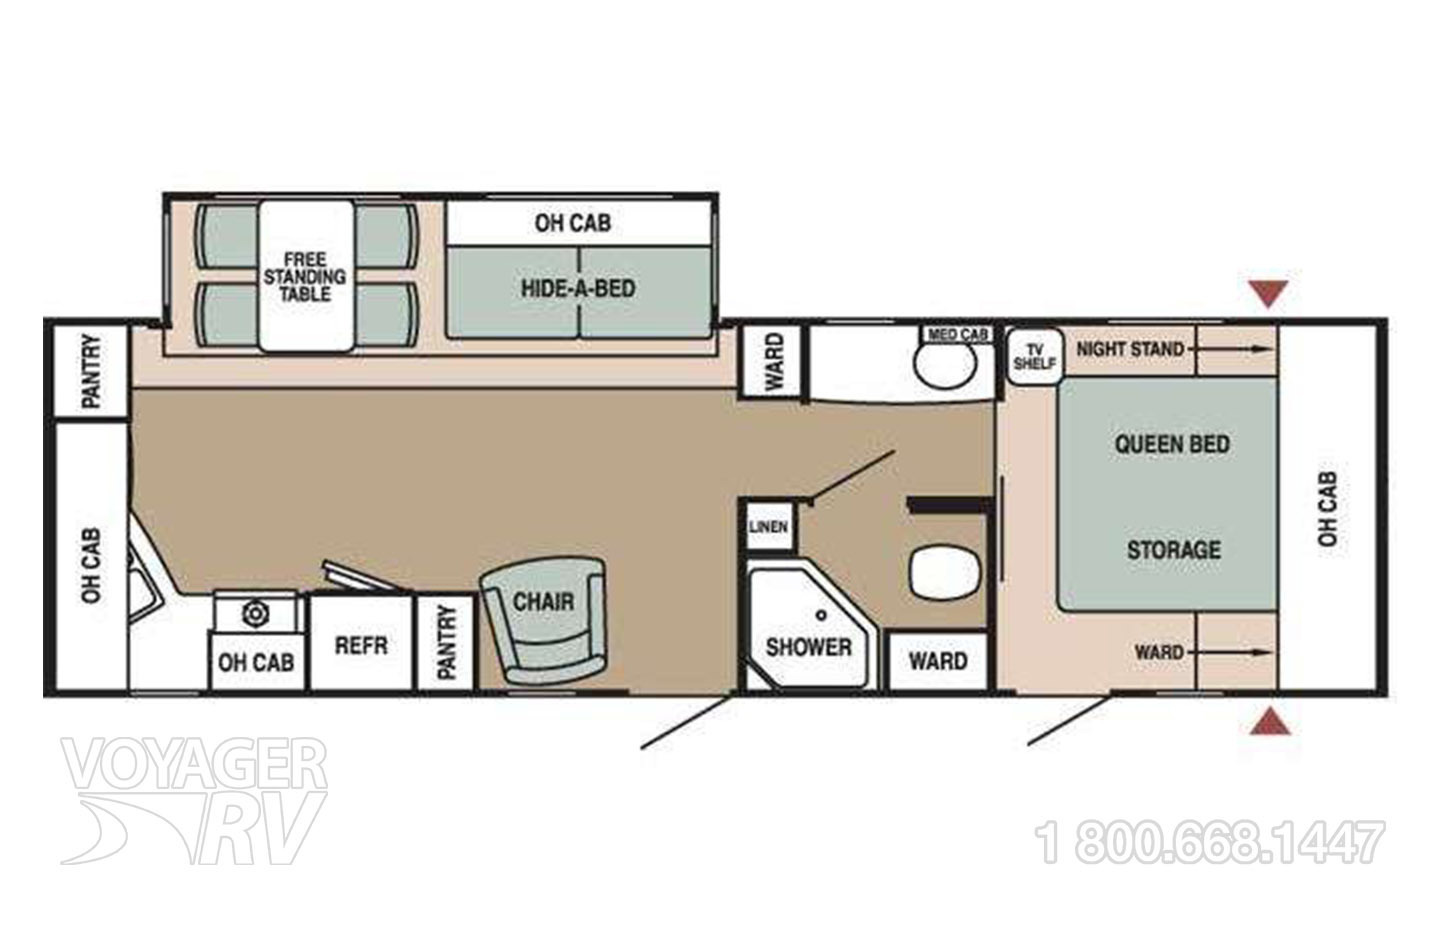 2012 Outdoors RV Back Country 22F Floorplan